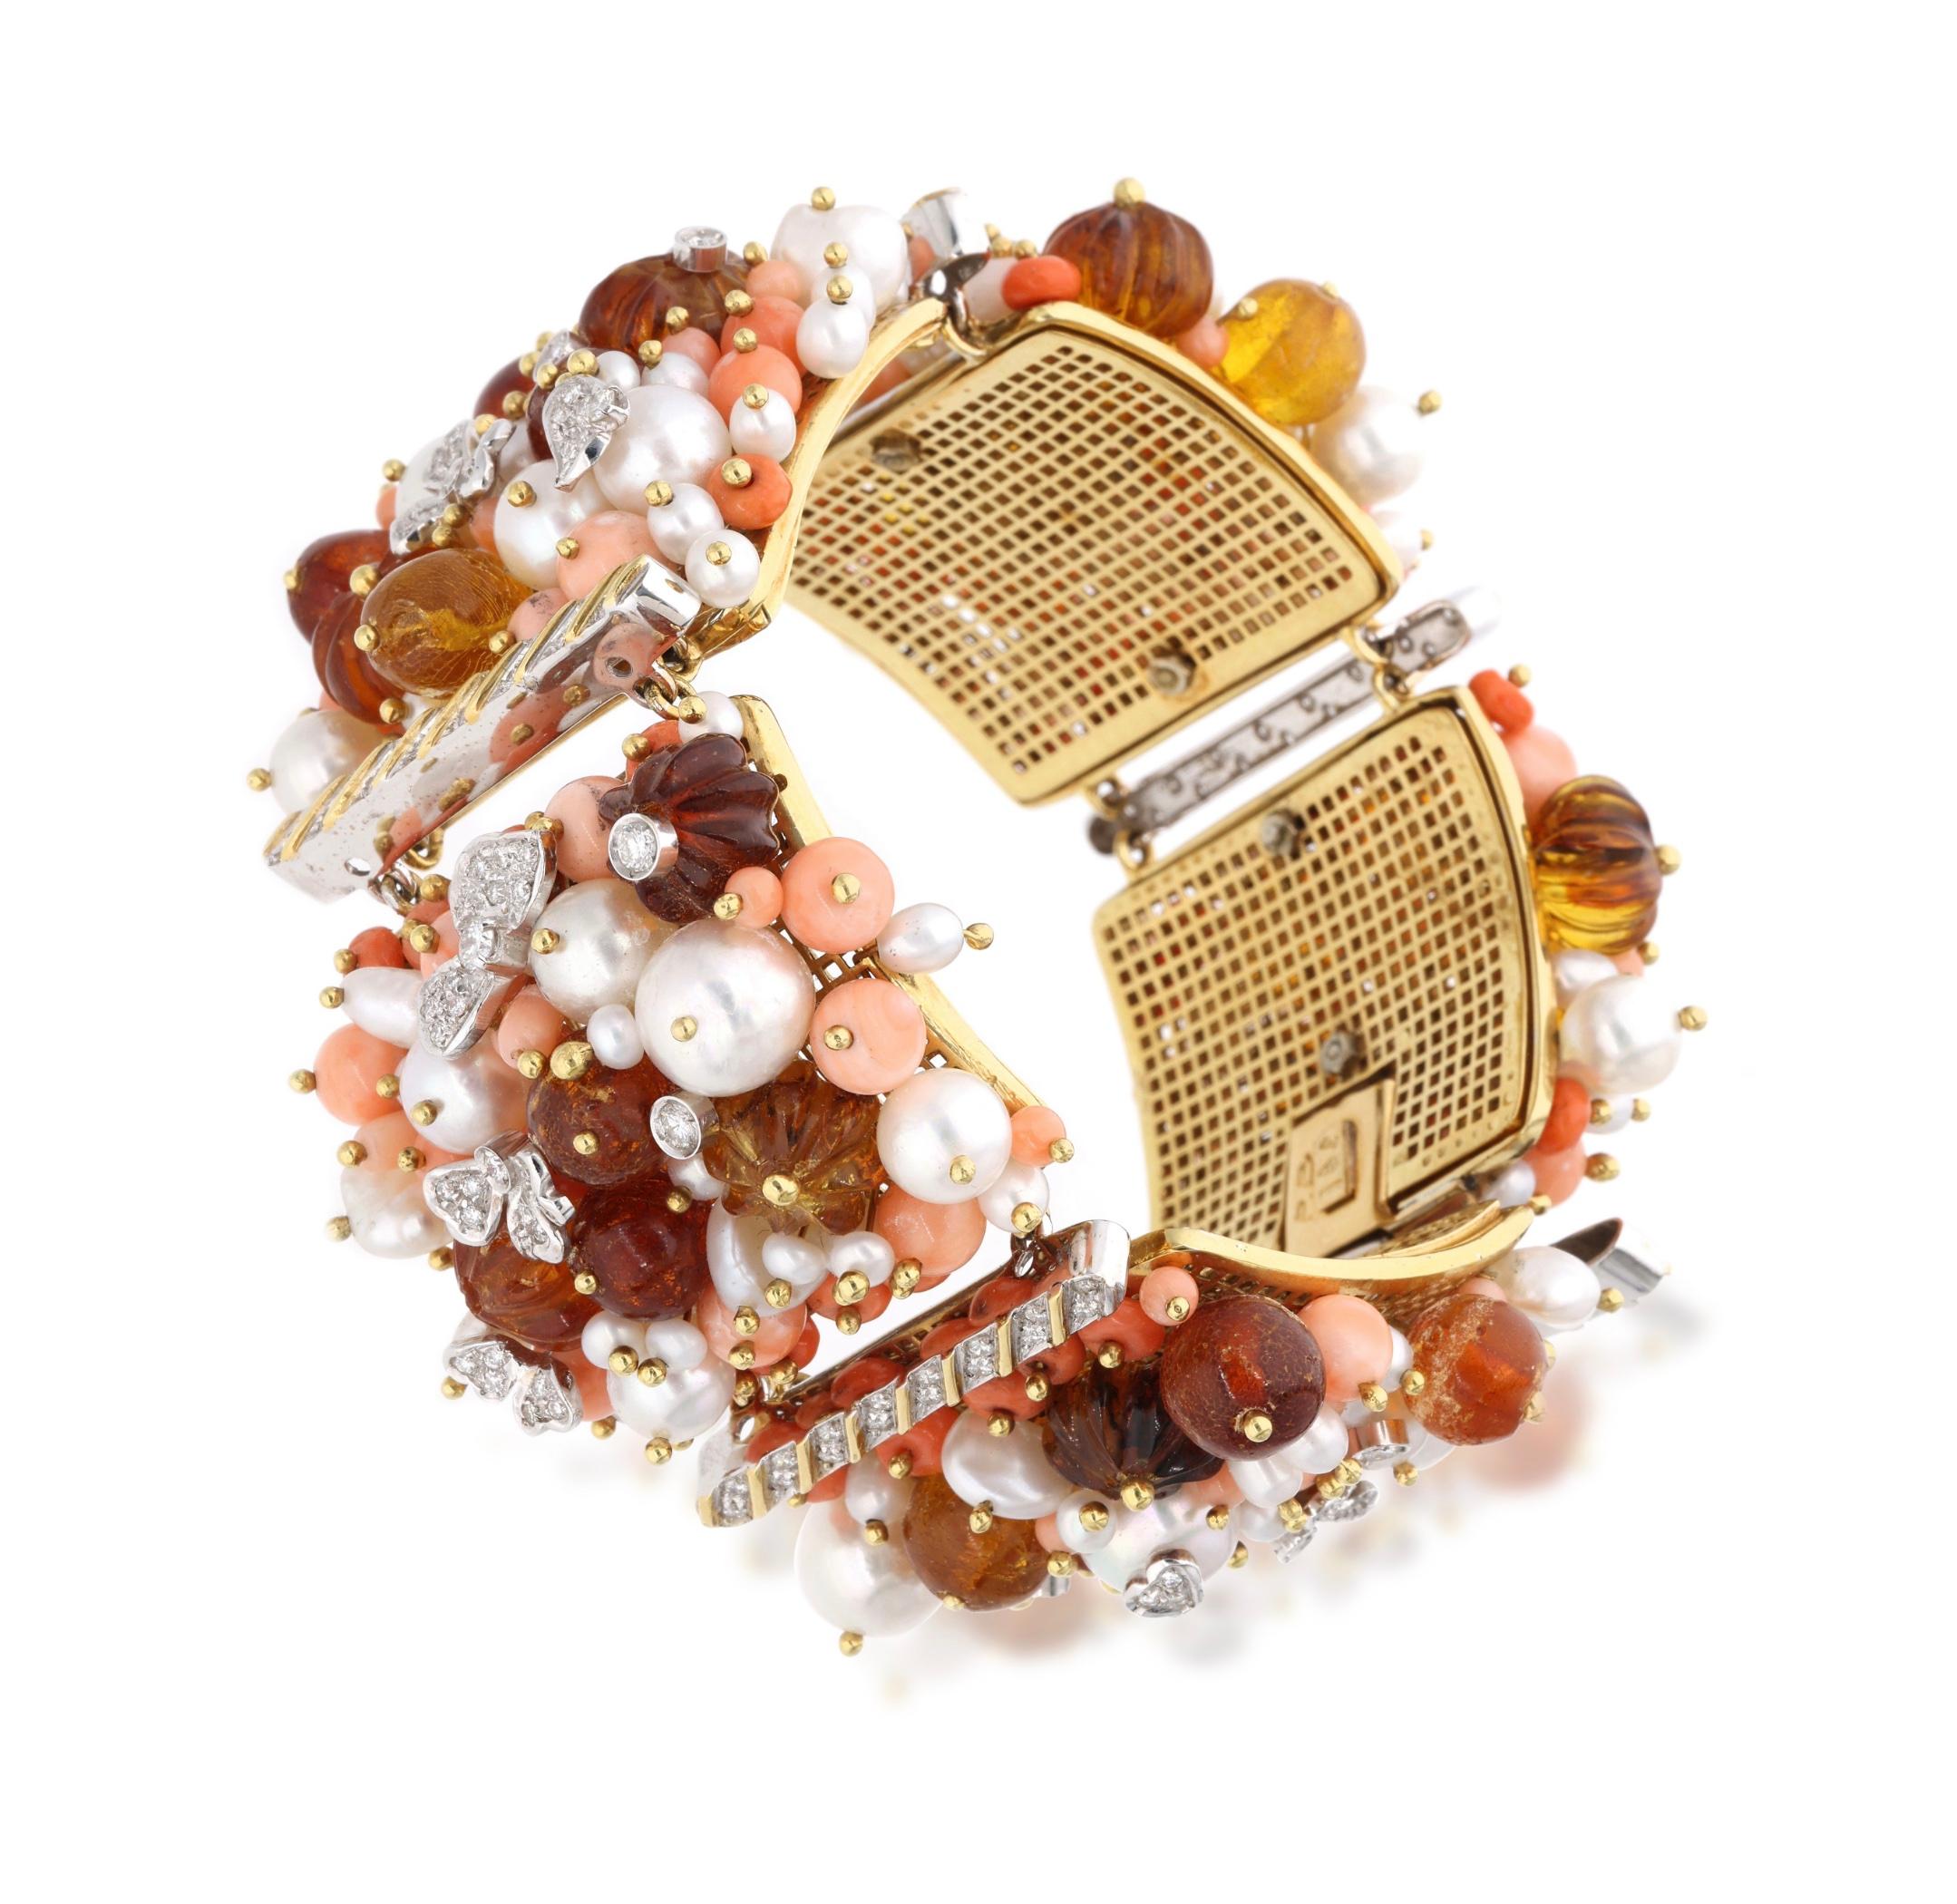 Composed of pink coral beads, amber beads, and cultured pearls, accented by round diamonds.

- Diamonds weigh a total of approximately 1.30 carats
- 18 karat yellow gold and white gold
- Total weight 148.96 grams
- Length 7.5 inches

The condition